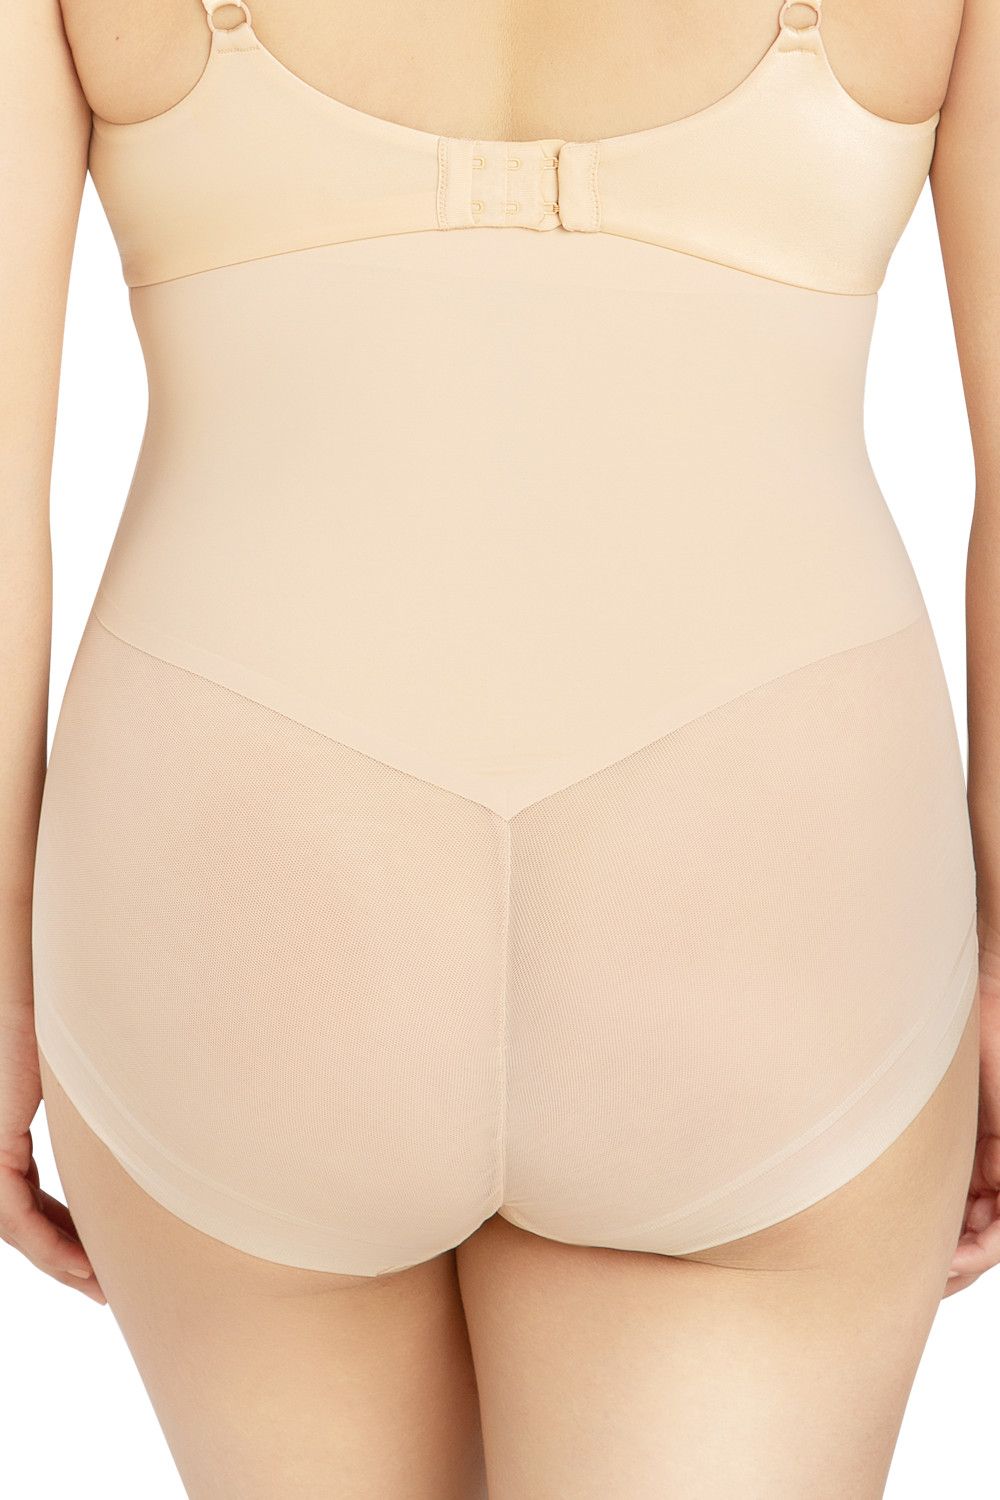 Underoutfit High Waisted Underwear for Women- Tummy Control